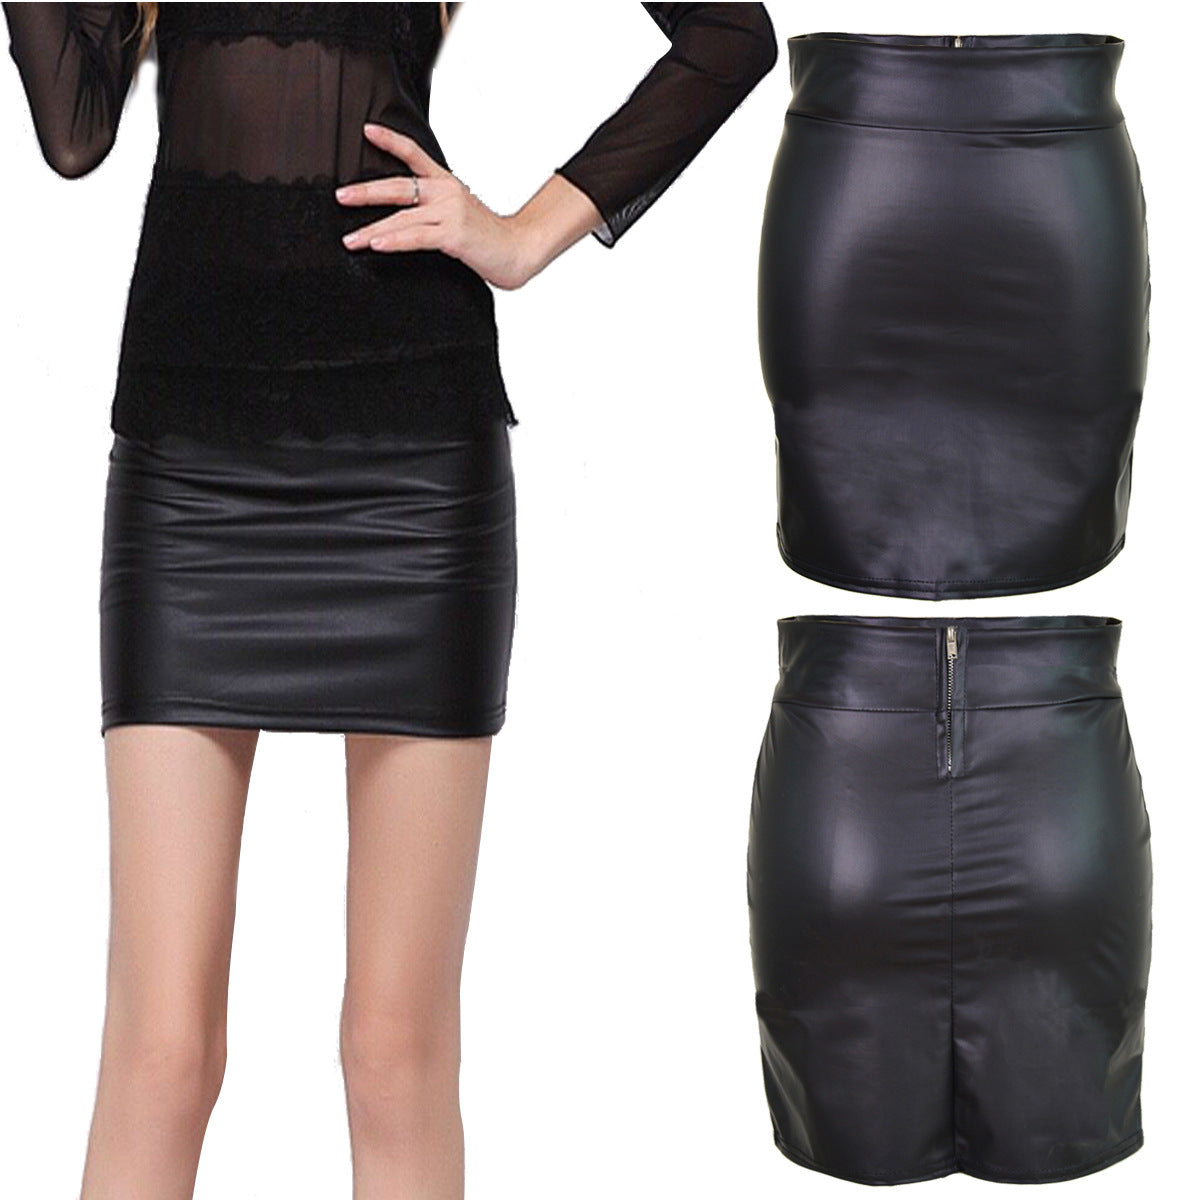 Plus Size Women's  Faux Leather Skirt  Skirt Thecurvestory